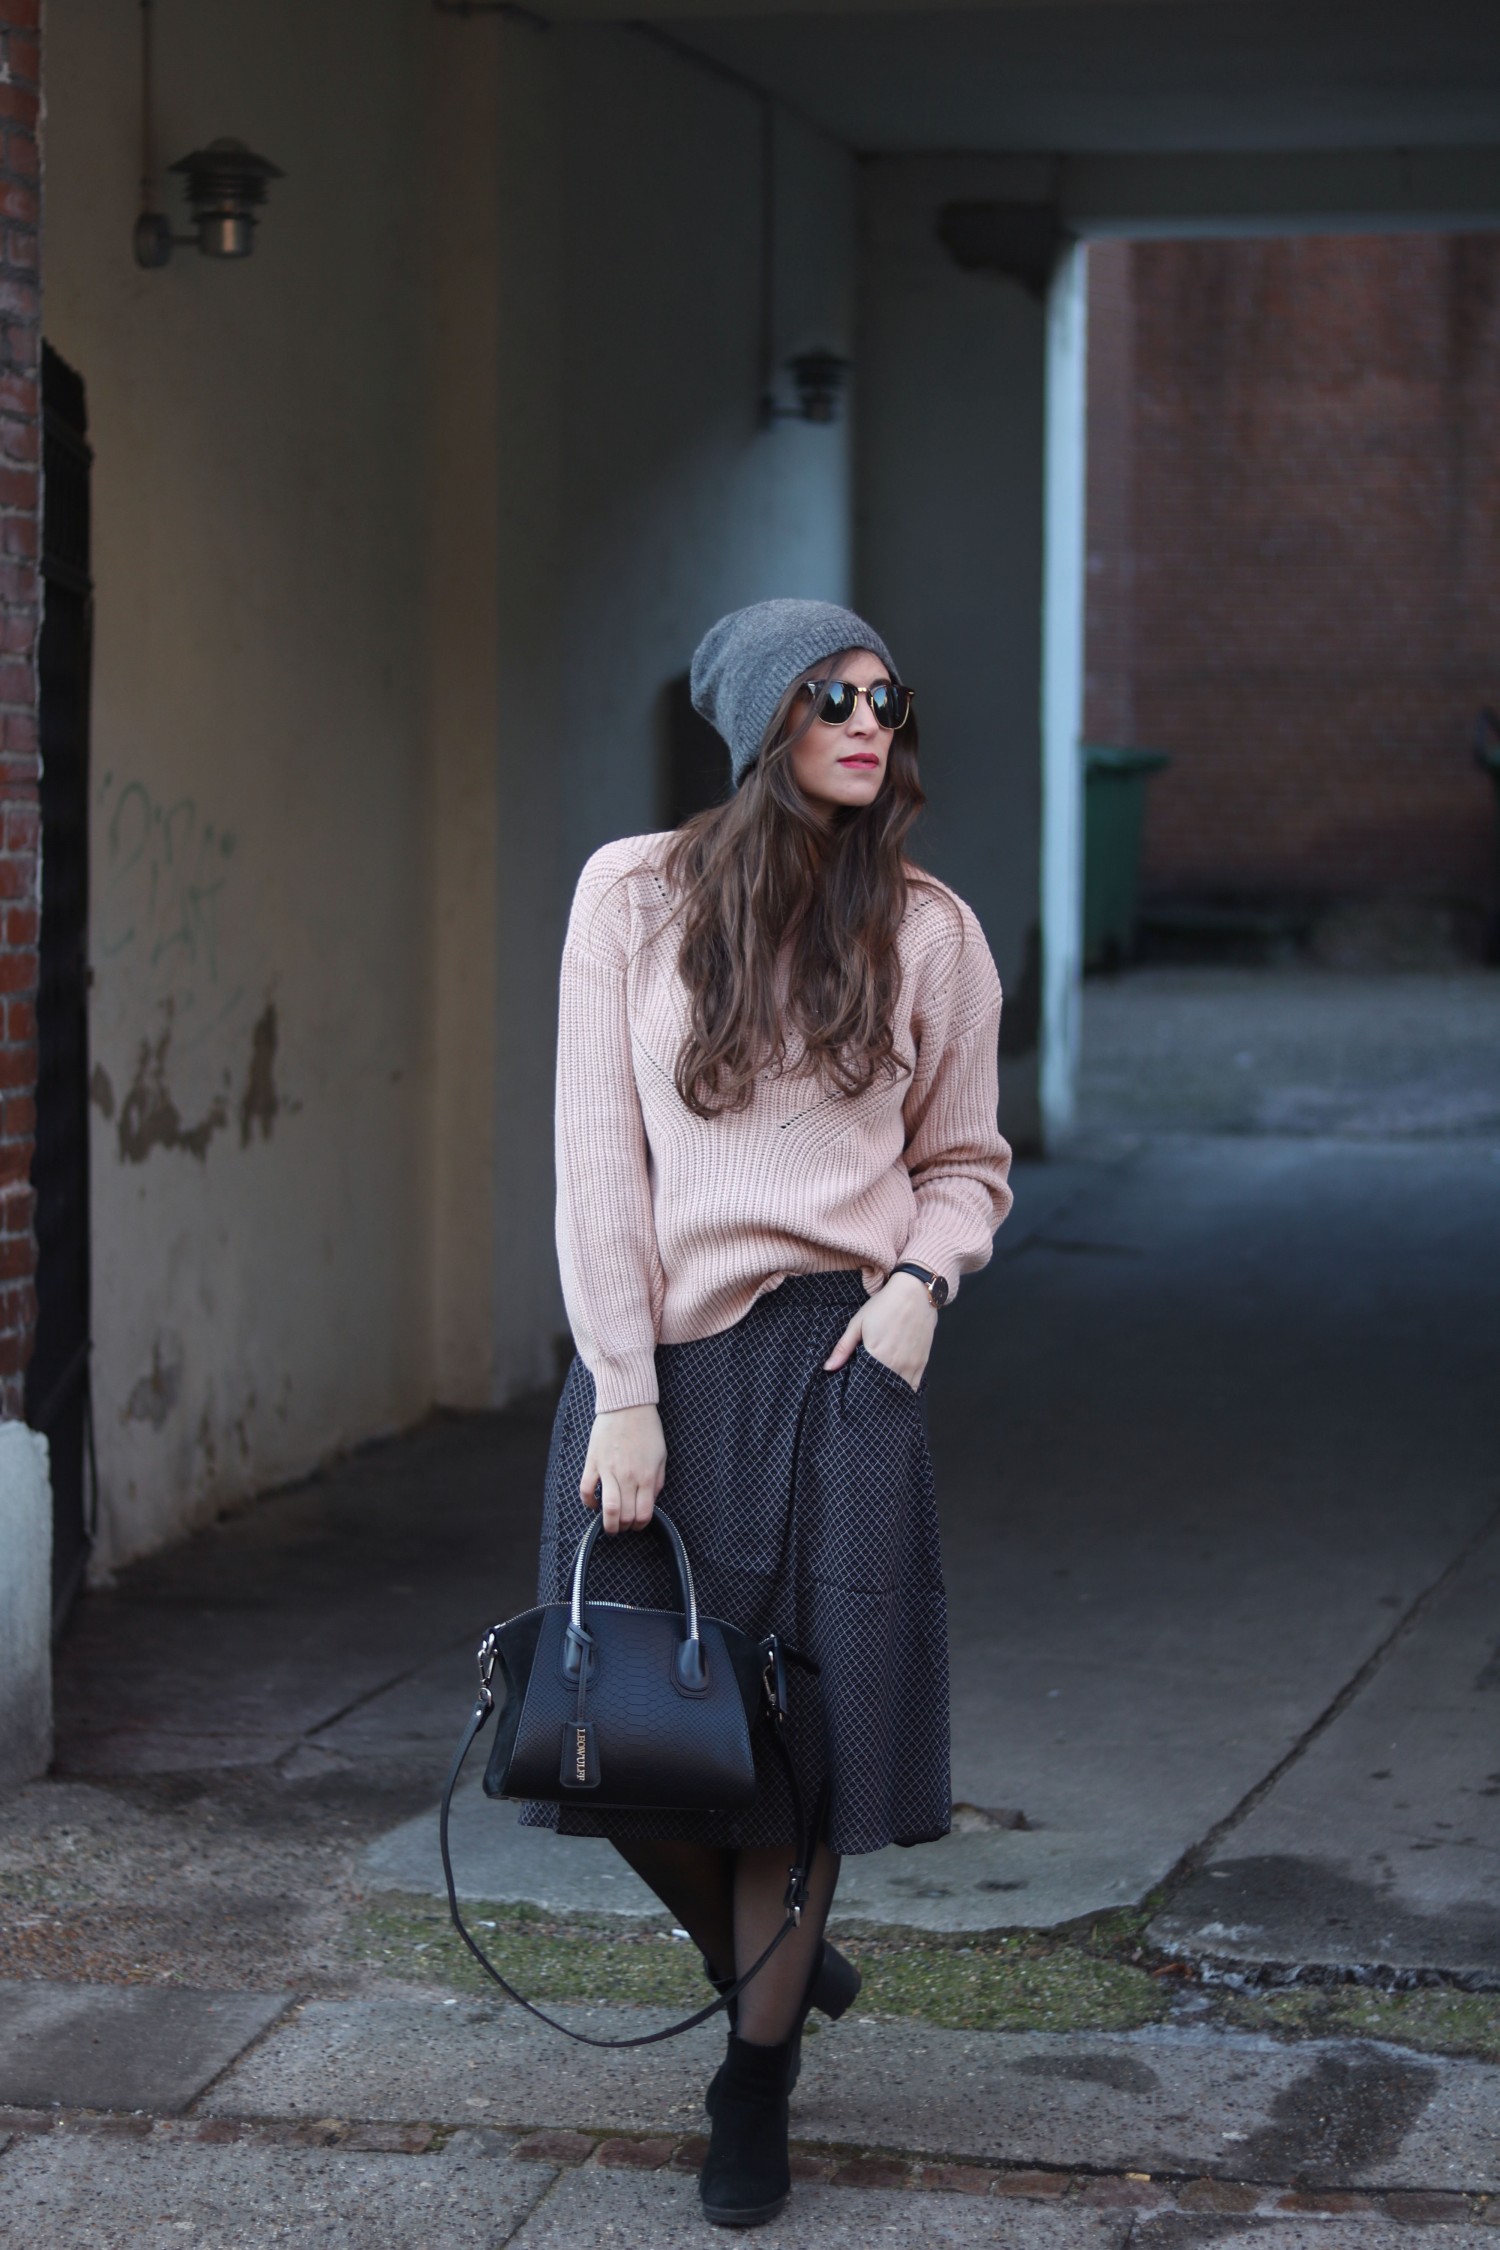 NY BLOG, NYT OUTFIT, NYT ANSIGT | LOOK OF THE DAY | BLOGGER ON HEELS